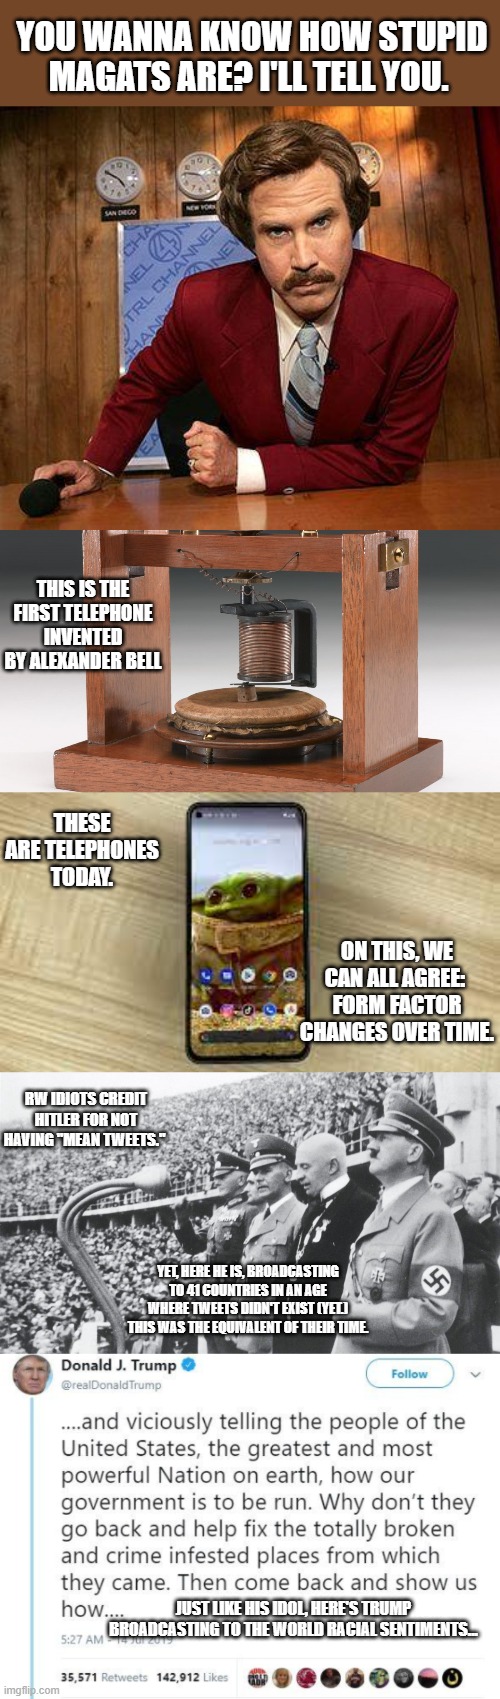 Pretty easy to backhand their rhetoric with some simple logic. | YOU WANNA KNOW HOW STUPID MAGATS ARE? I'LL TELL YOU. THIS IS THE FIRST TELEPHONE INVENTED BY ALEXANDER BELL; THESE ARE TELEPHONES TODAY. ON THIS, WE CAN ALL AGREE: 
FORM FACTOR CHANGES OVER TIME. RW IDIOTS CREDIT HITLER FOR NOT HAVING "MEAN TWEETS."; YET, HERE HE IS, BROADCASTING TO 41 COUNTRIES IN AN AGE WHERE TWEETS DIDN'T EXIST (YET.) THIS WAS THE EQUIVALENT OF THEIR TIME. JUST LIKE HIS IDOL, HERE'S TRUMP BROADCASTING TO THE WORLD RACIAL SENTIMENTS... | image tagged in ron burgundy,hitler,mean tweet,trump,maga,nazis | made w/ Imgflip meme maker